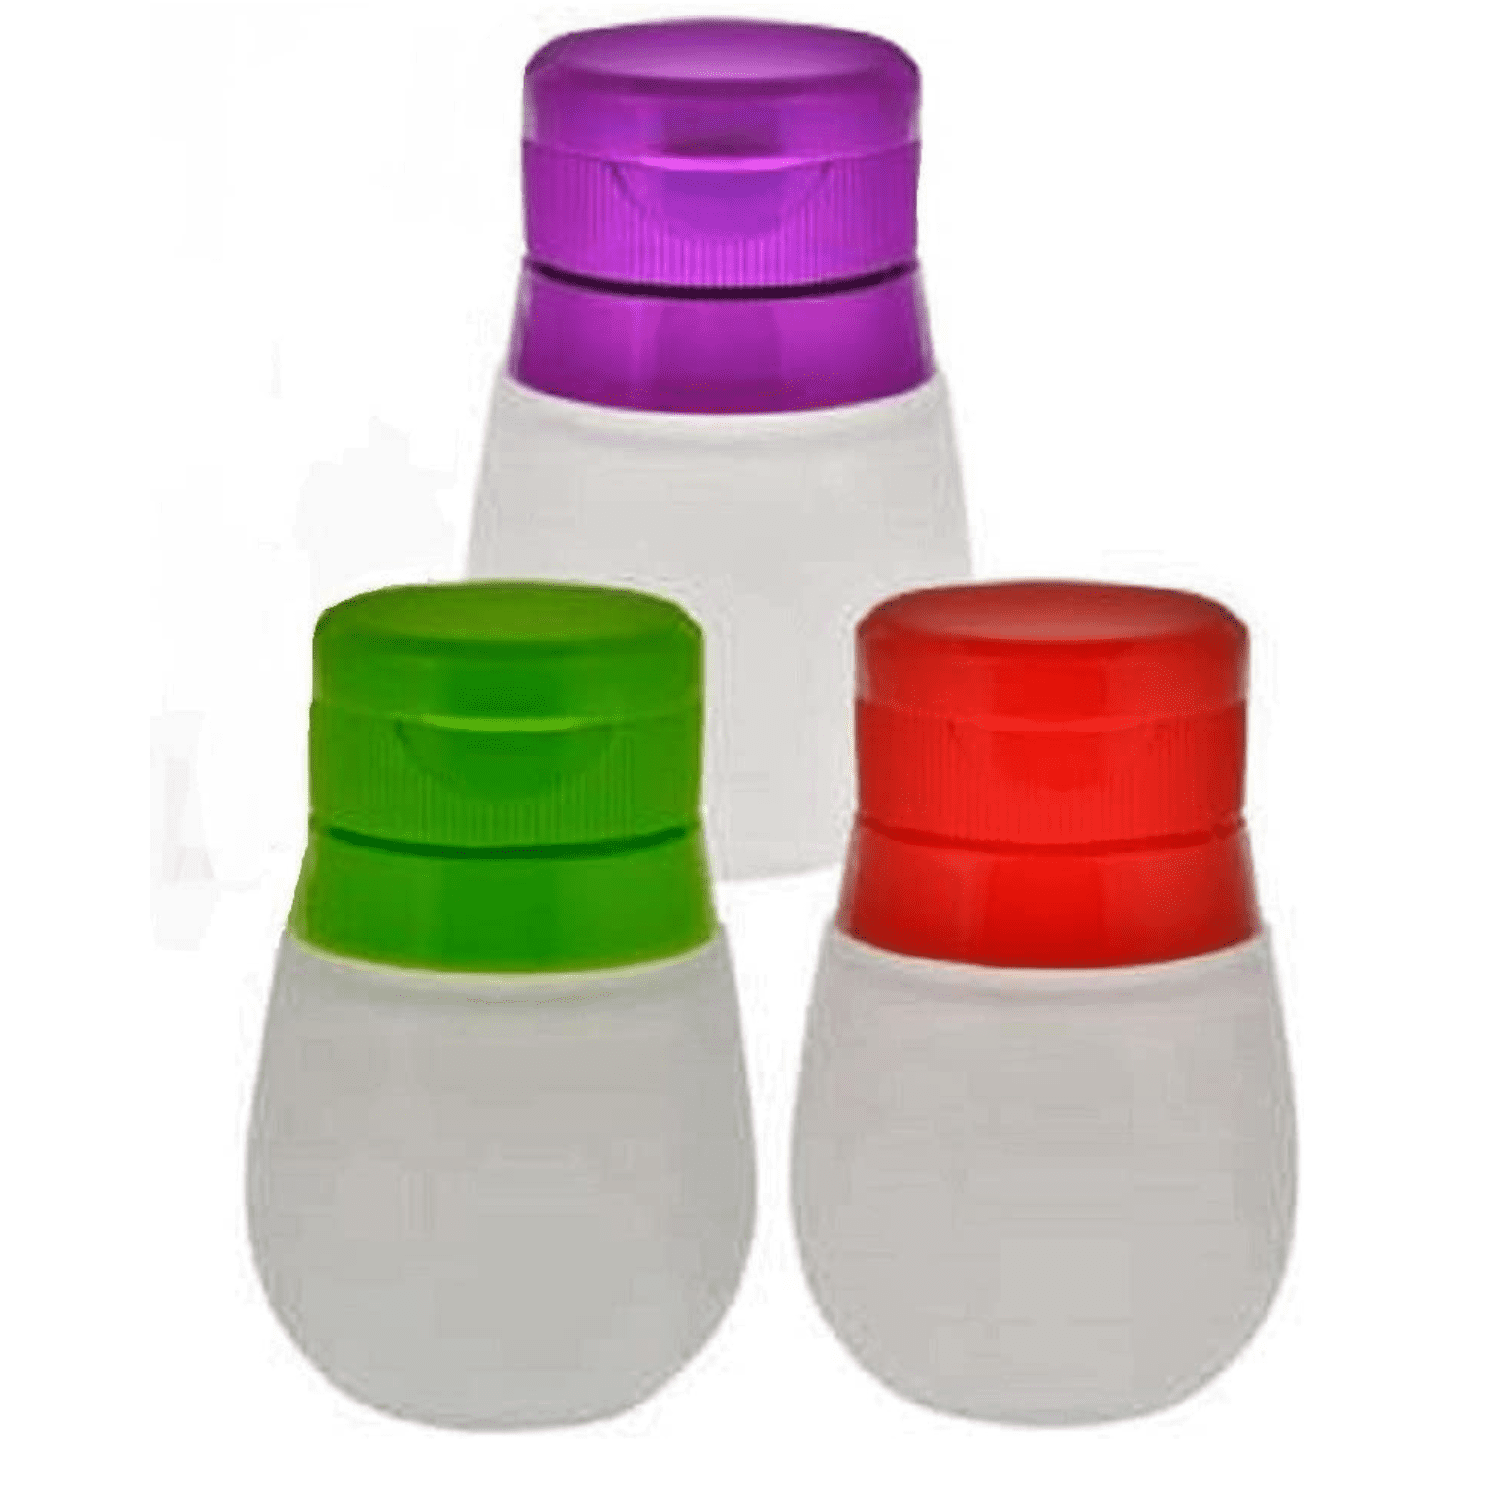 3pcs Mini Squeeze Bottle Salad Dressing Containers Outdoor